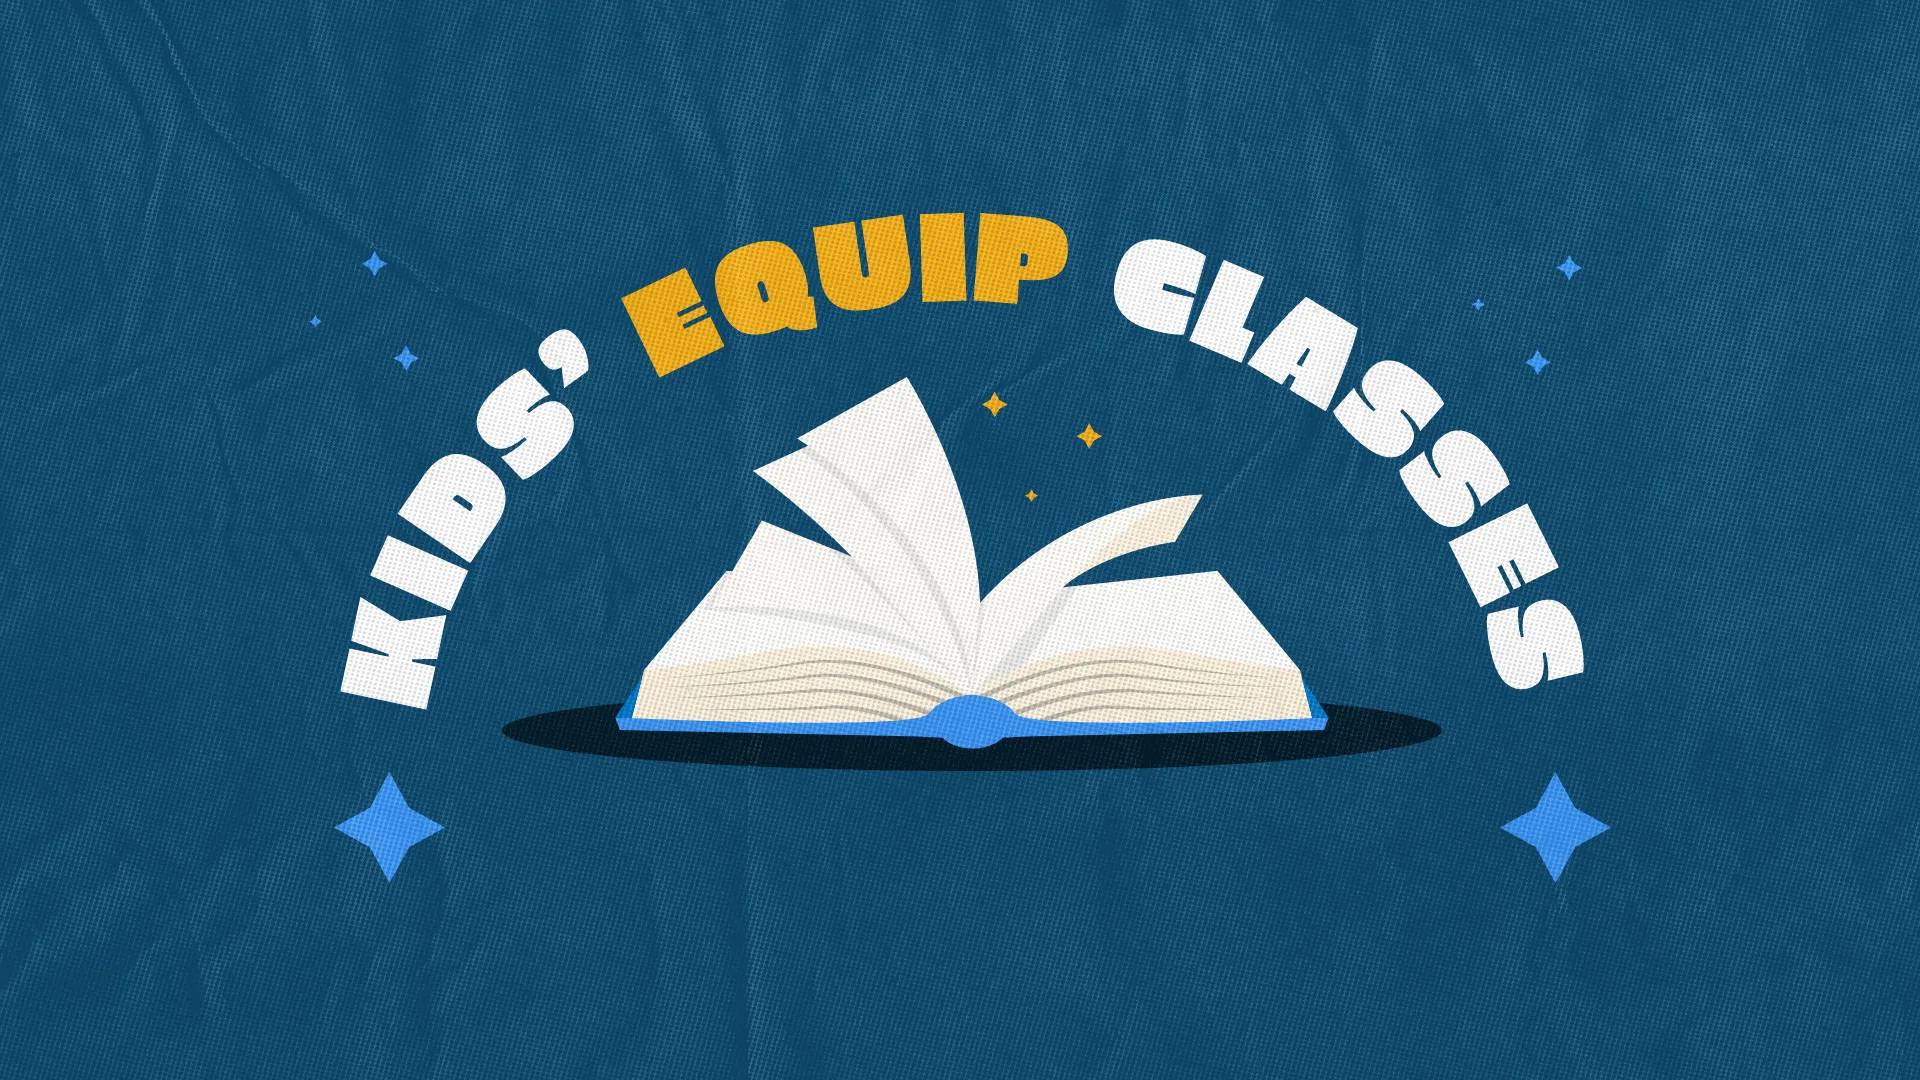 Spark Curiosity And Encourage Learning With This Vibrant 'Kids Equip Classes' Graphic, Perfectly Tailored For Engaging Young Minds In Church Settings. The Playful Design Is Ideal For Promoting Sunday School Or Educational Programs.